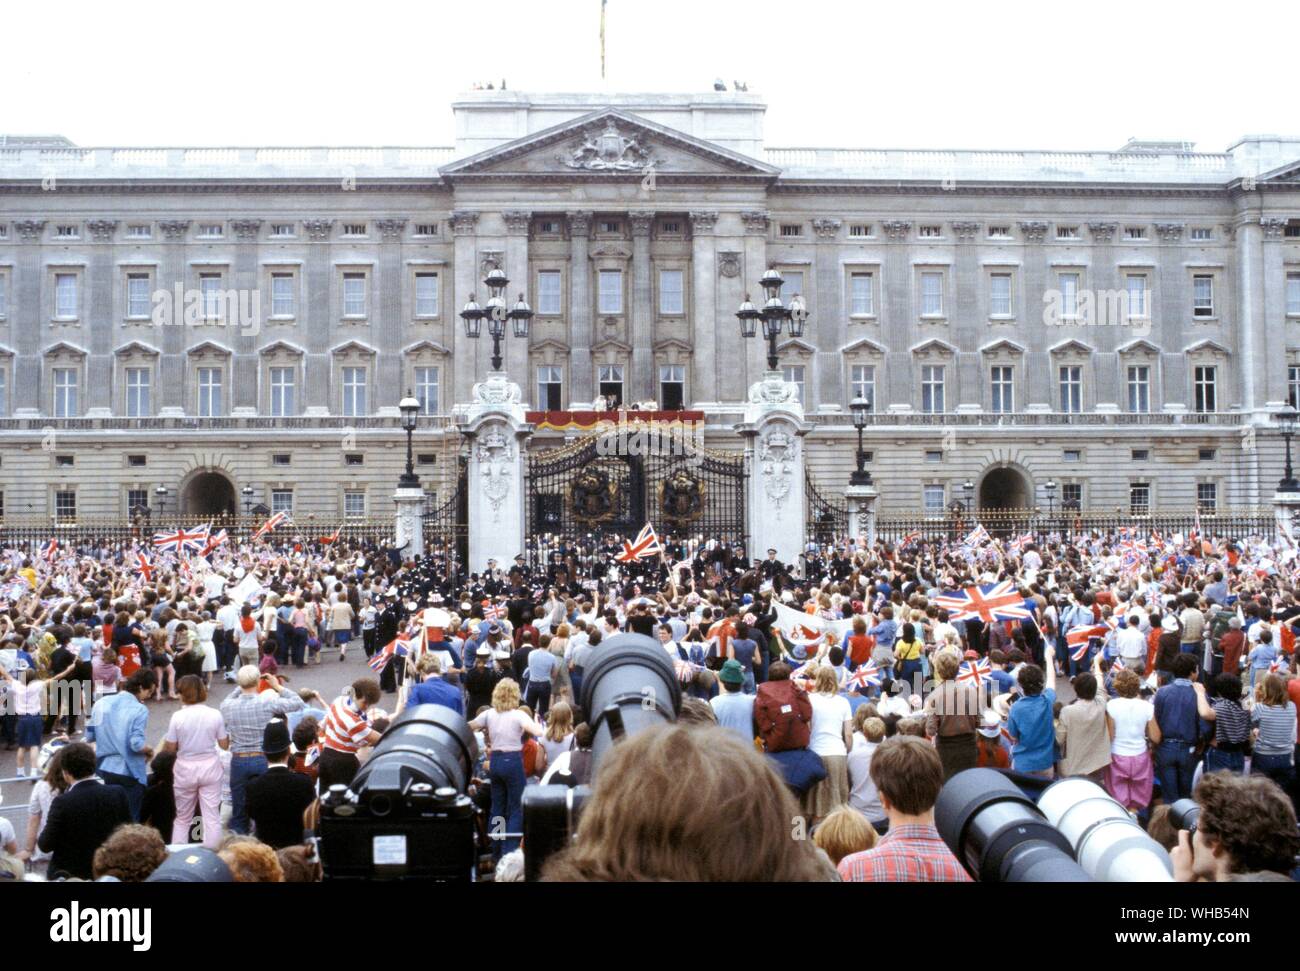 Crowds of wellwishers outside Buckingham Palace to see Prince Charles and Lady Diana Spencer on their wedding day 29 July 1981. Stock Photo